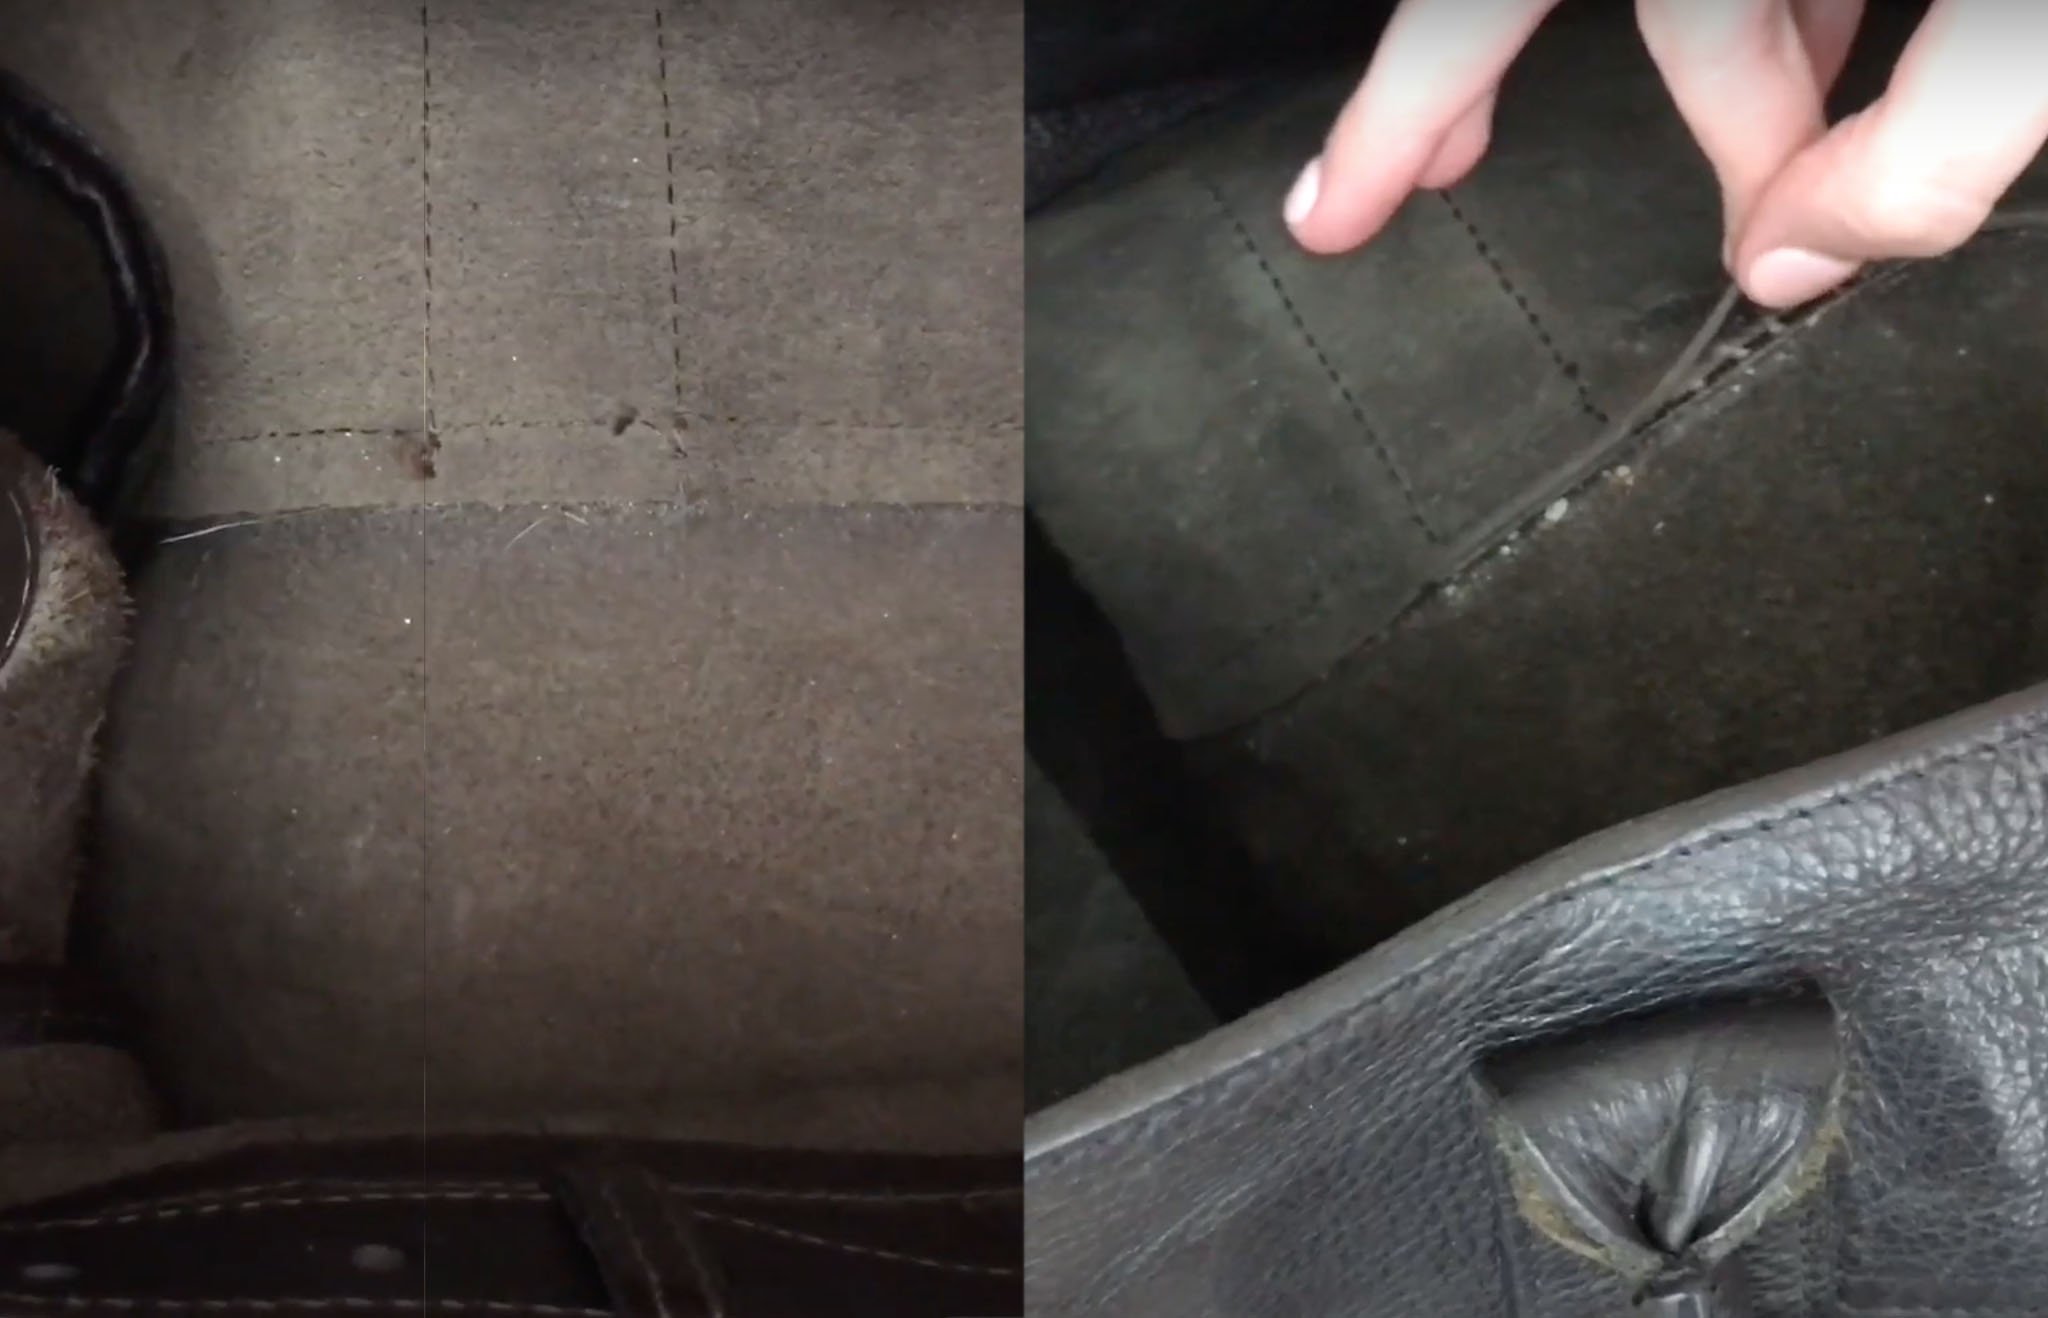 Stitchings on the real Mulberry bag (left) are straight and solid compared to a fake bag (right)